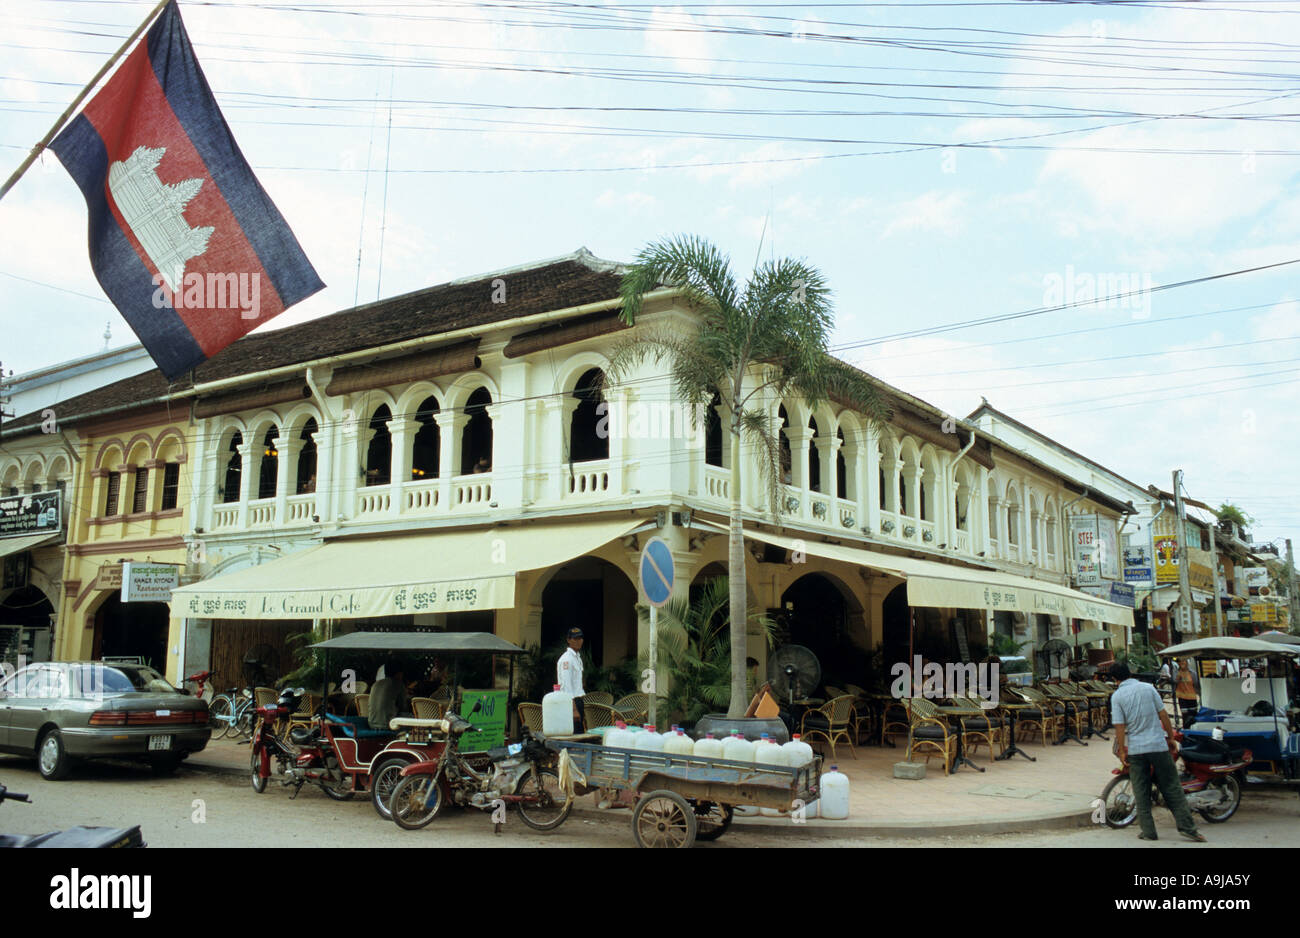 Le Grand Cafe in an old French colonial building, and Cambodian flag, Siem Reap, Cambodia Stock Photo